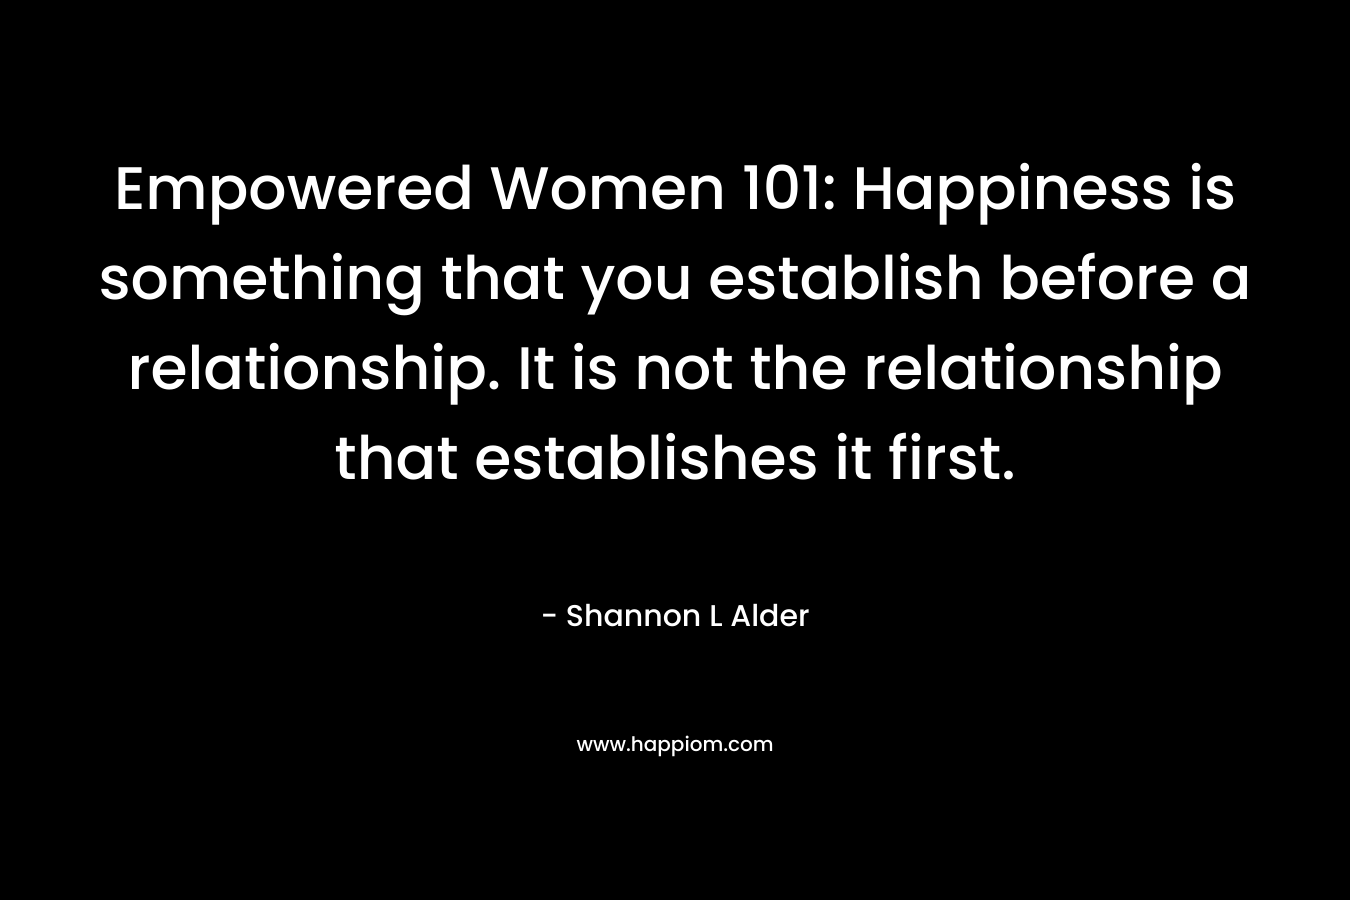 Empowered Women 101: Happiness is something that you establish before a relationship. It is not the relationship that establishes it first.